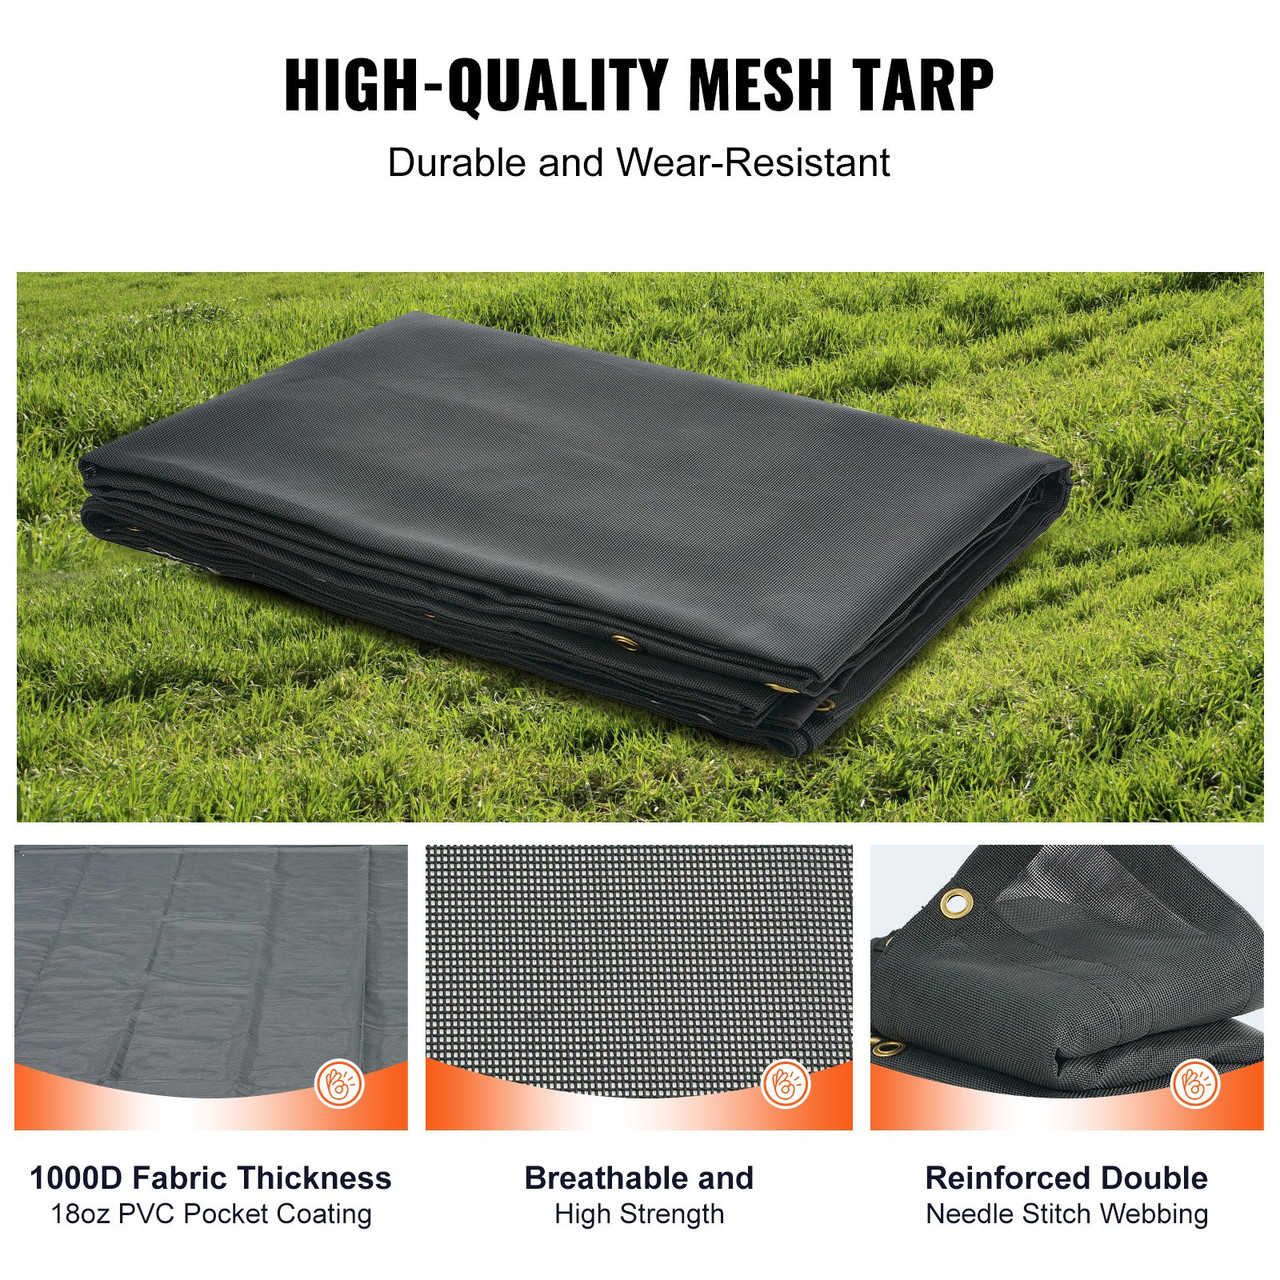 Dump Truck Mesh Tarp, 6.5x18 ft, PVC Coated Black Heavy Duty Cover with 5.5" 18oz Double Pocket, Brass Grommets, Reinforced Double Needle Stitch Webbing Fits Manual or Electric Dump Truck System